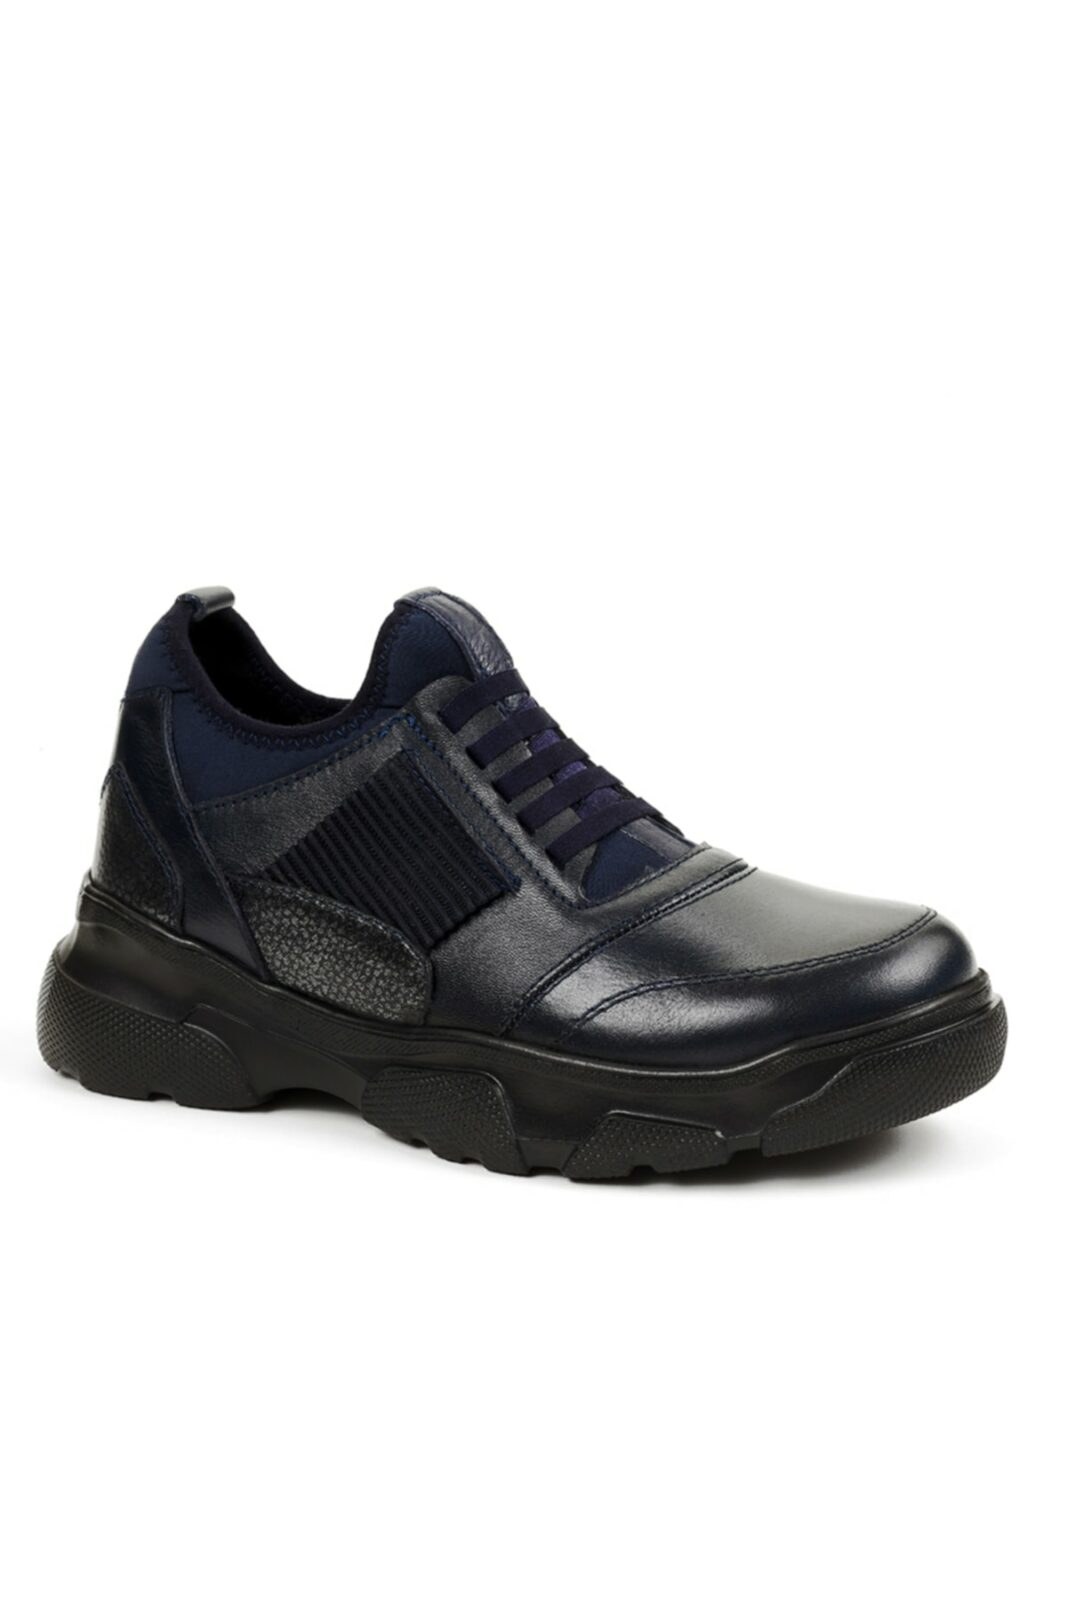 Forelli Ankle Boots - Navy